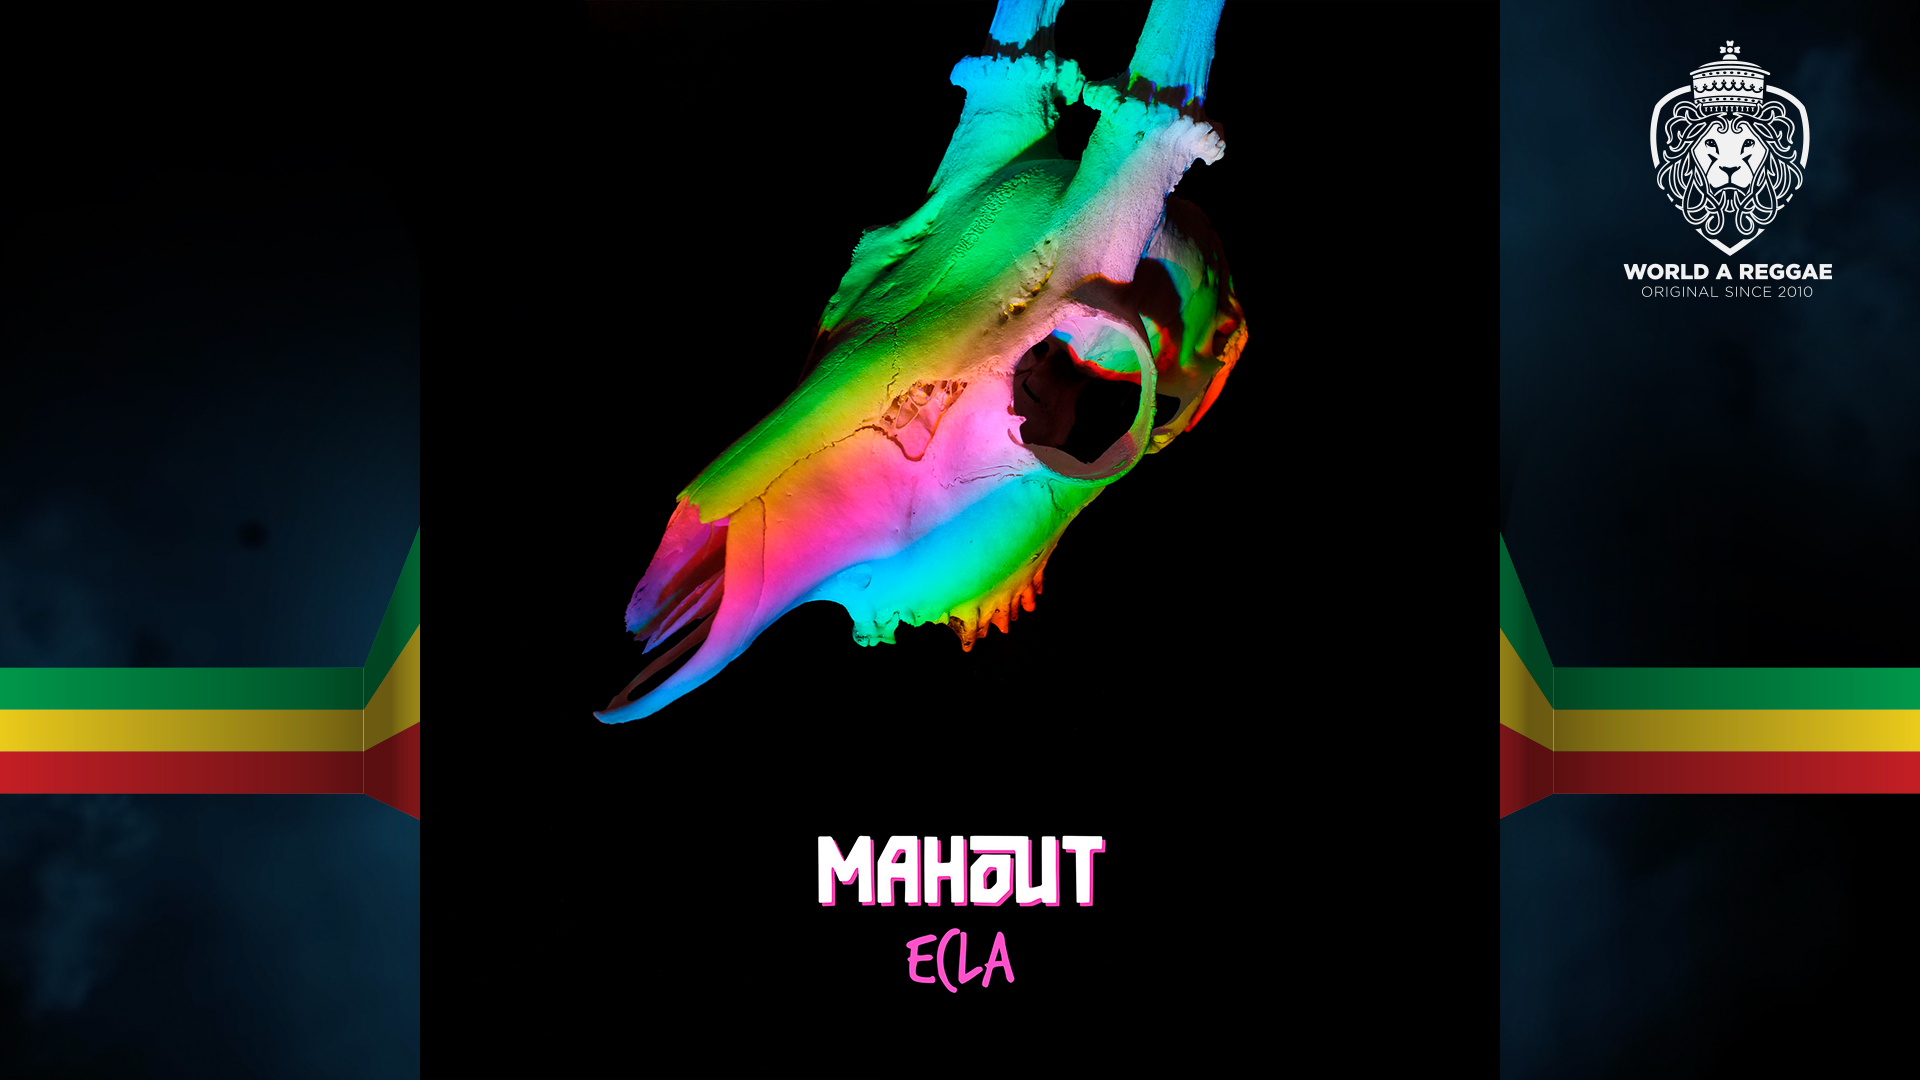 Mahout’s new single ECLA is out on June 8th.